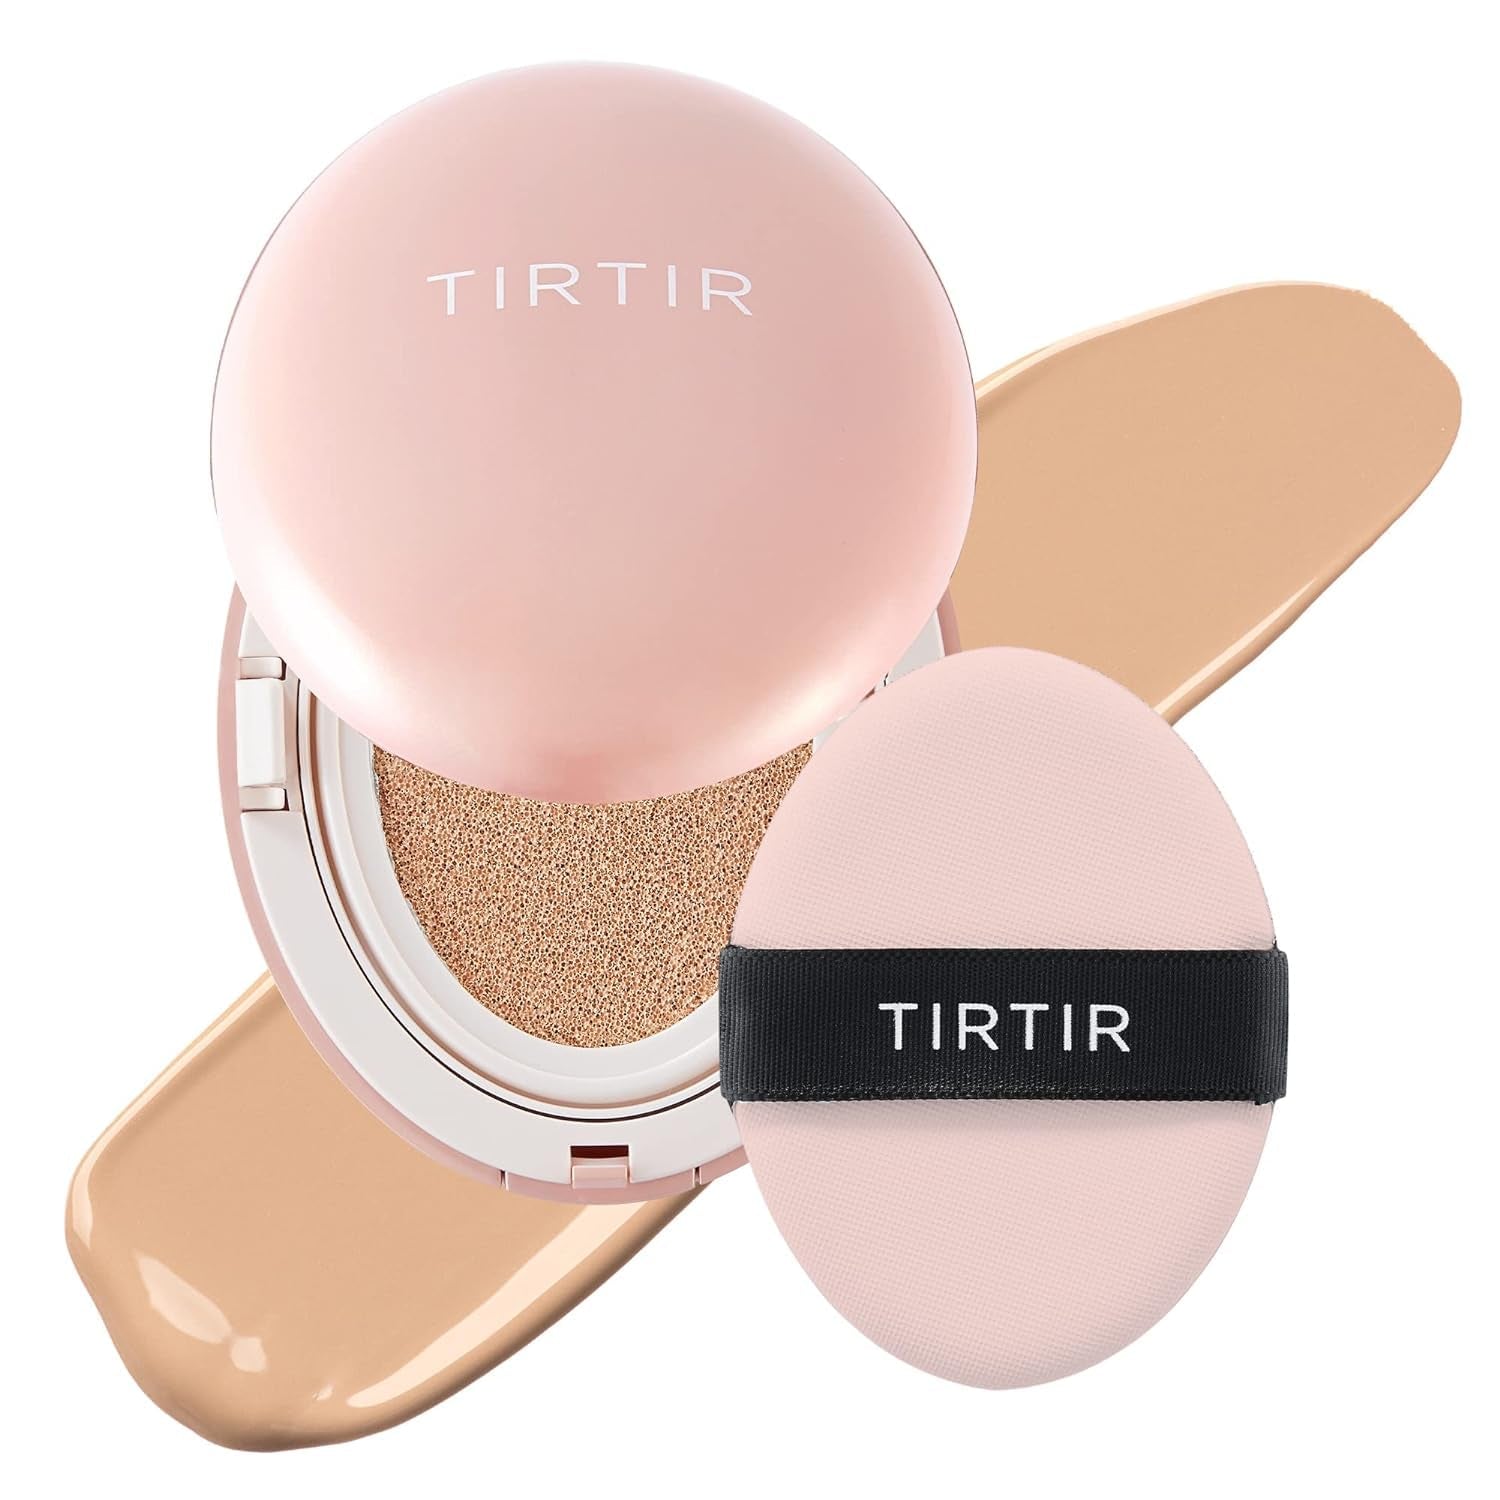 TIRTIR Mask Fit All Cover Pink Cushion Foundation | High Coverage, Semi-Matte Finish, Lightweight, Flawless, Corrects Redness, Korean Cushion, Pack of 1 (0.63 Oz.), 21N Ivory